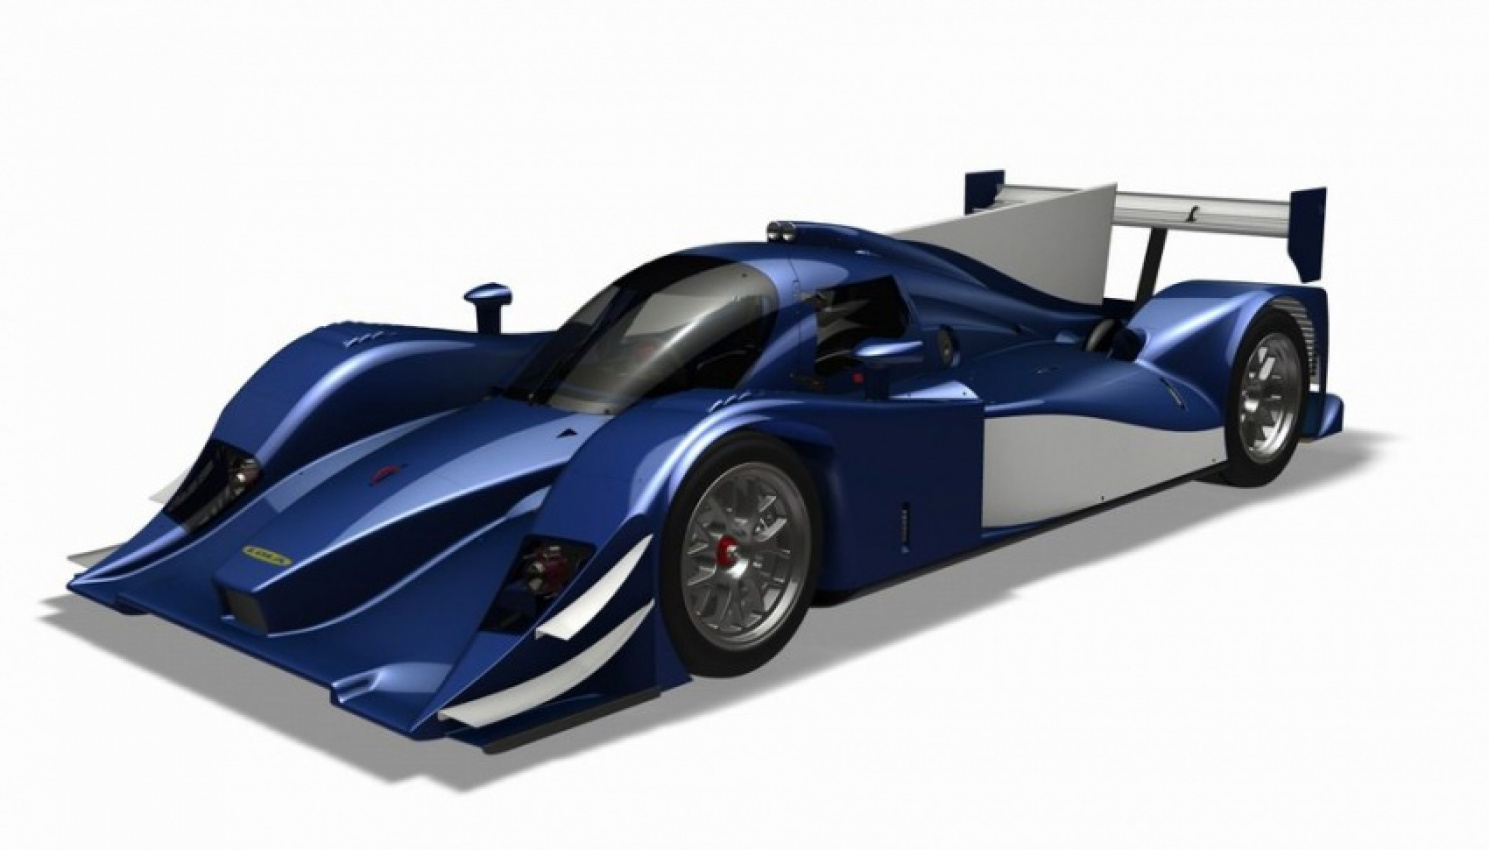 autos, cars, review, 2010s cars, lola, lola race car, lola race car in depth, motorsport, race car, race car in depth, 2011 lola b11/80 lmp2 coupe